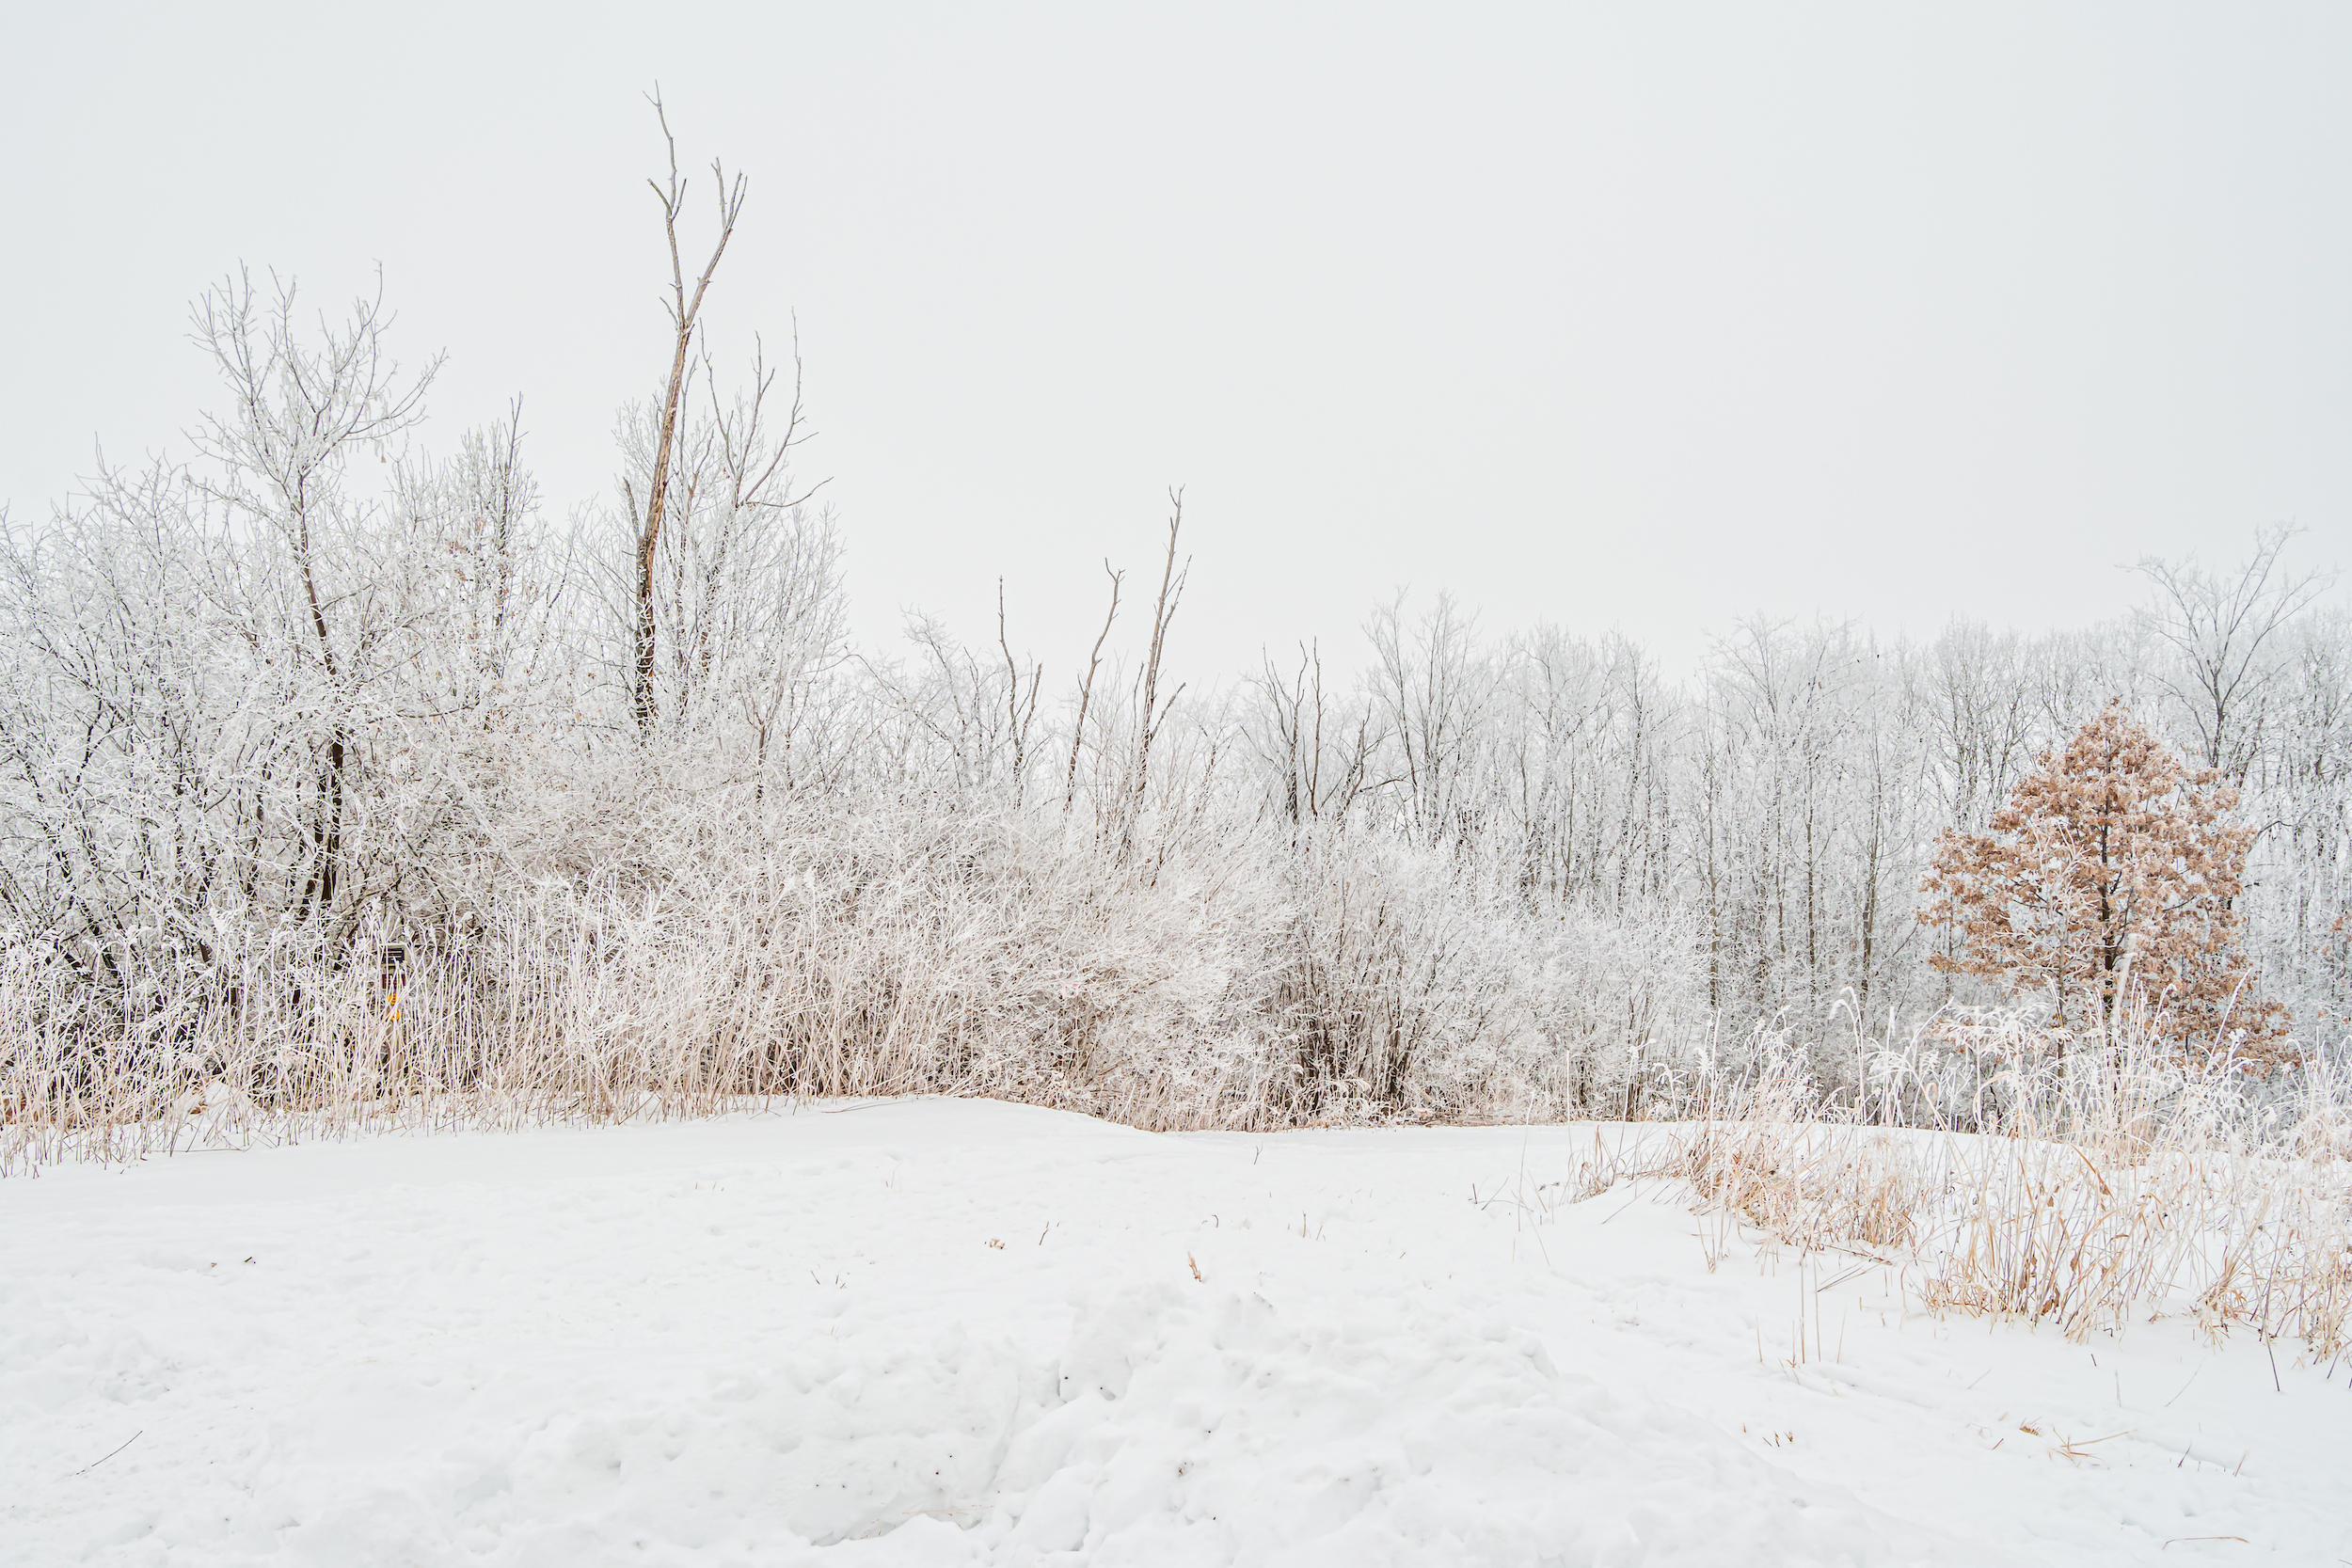 Rime ice on the trees at Pheasant Branch Conservancy in Middleton, Wis. on Jan. 4, 2021.